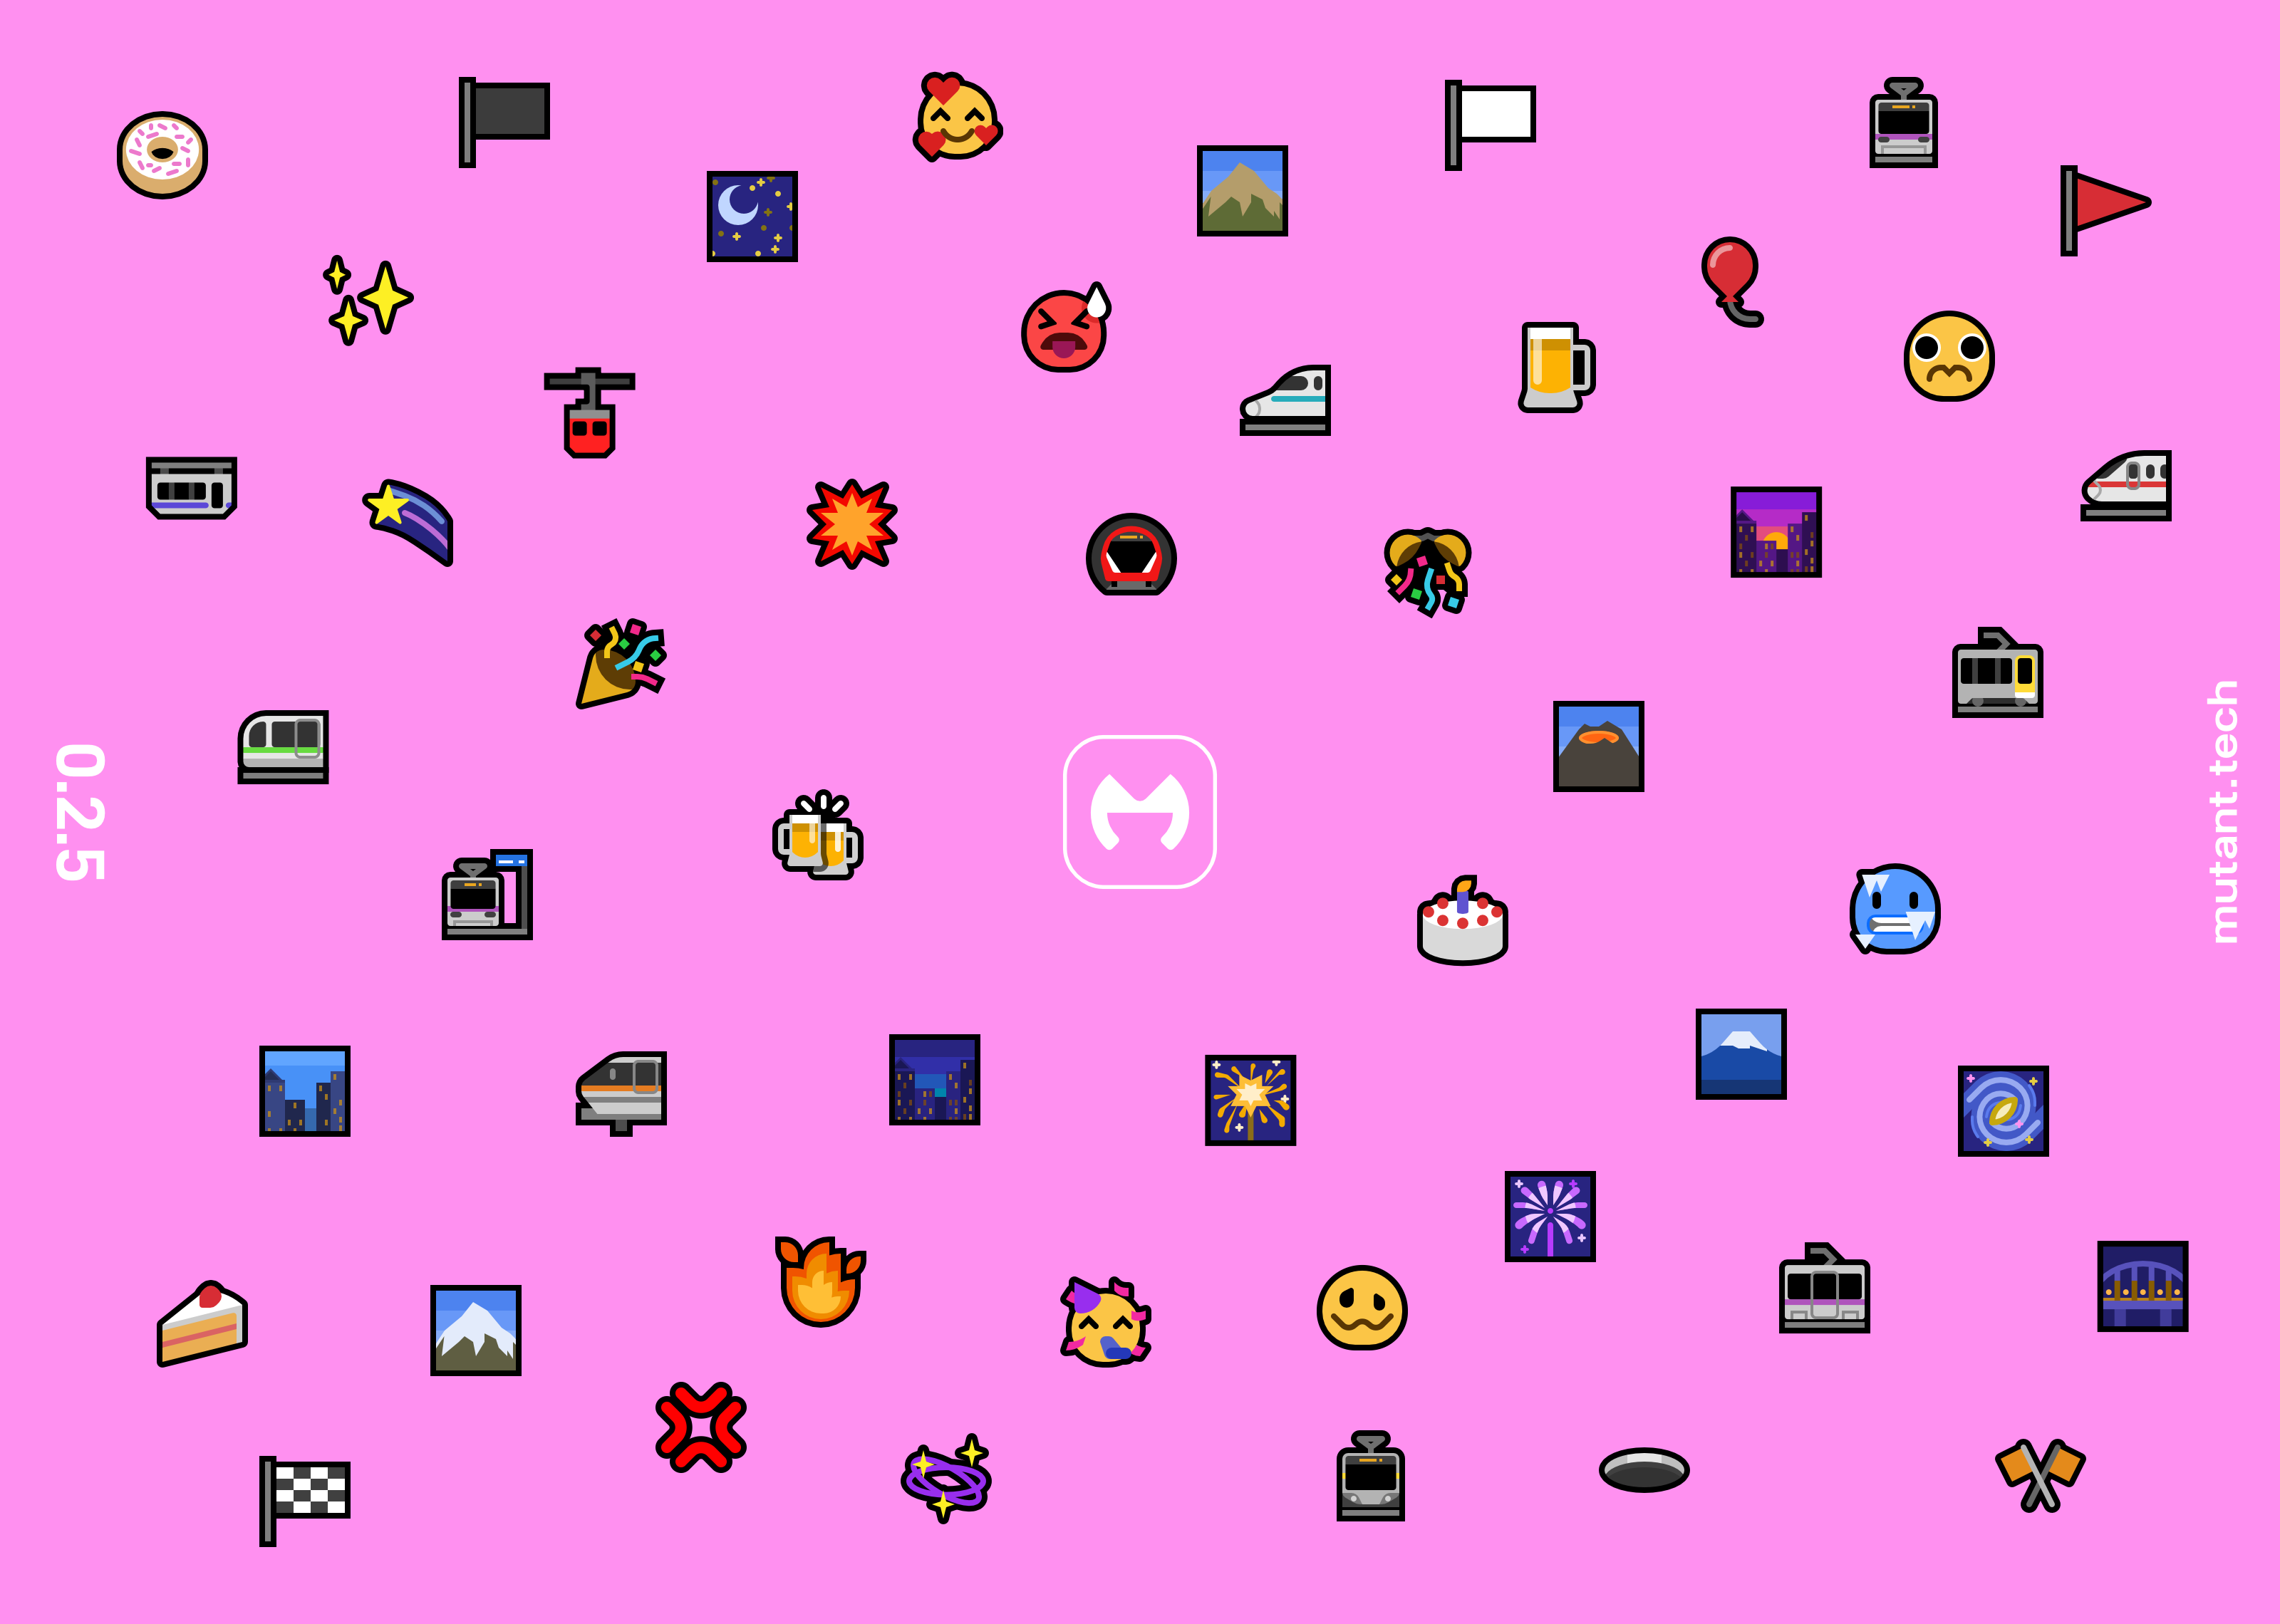 Mutant Standard 0.2.5 promo image. All of the new emoji are scattered in front of a bright pink background. In the middle is a clearing with a white Mutant Standard logo. At the left hand side there's '0.2.5', and on the right, there's 'mutant.tech'', both vertical aligned.